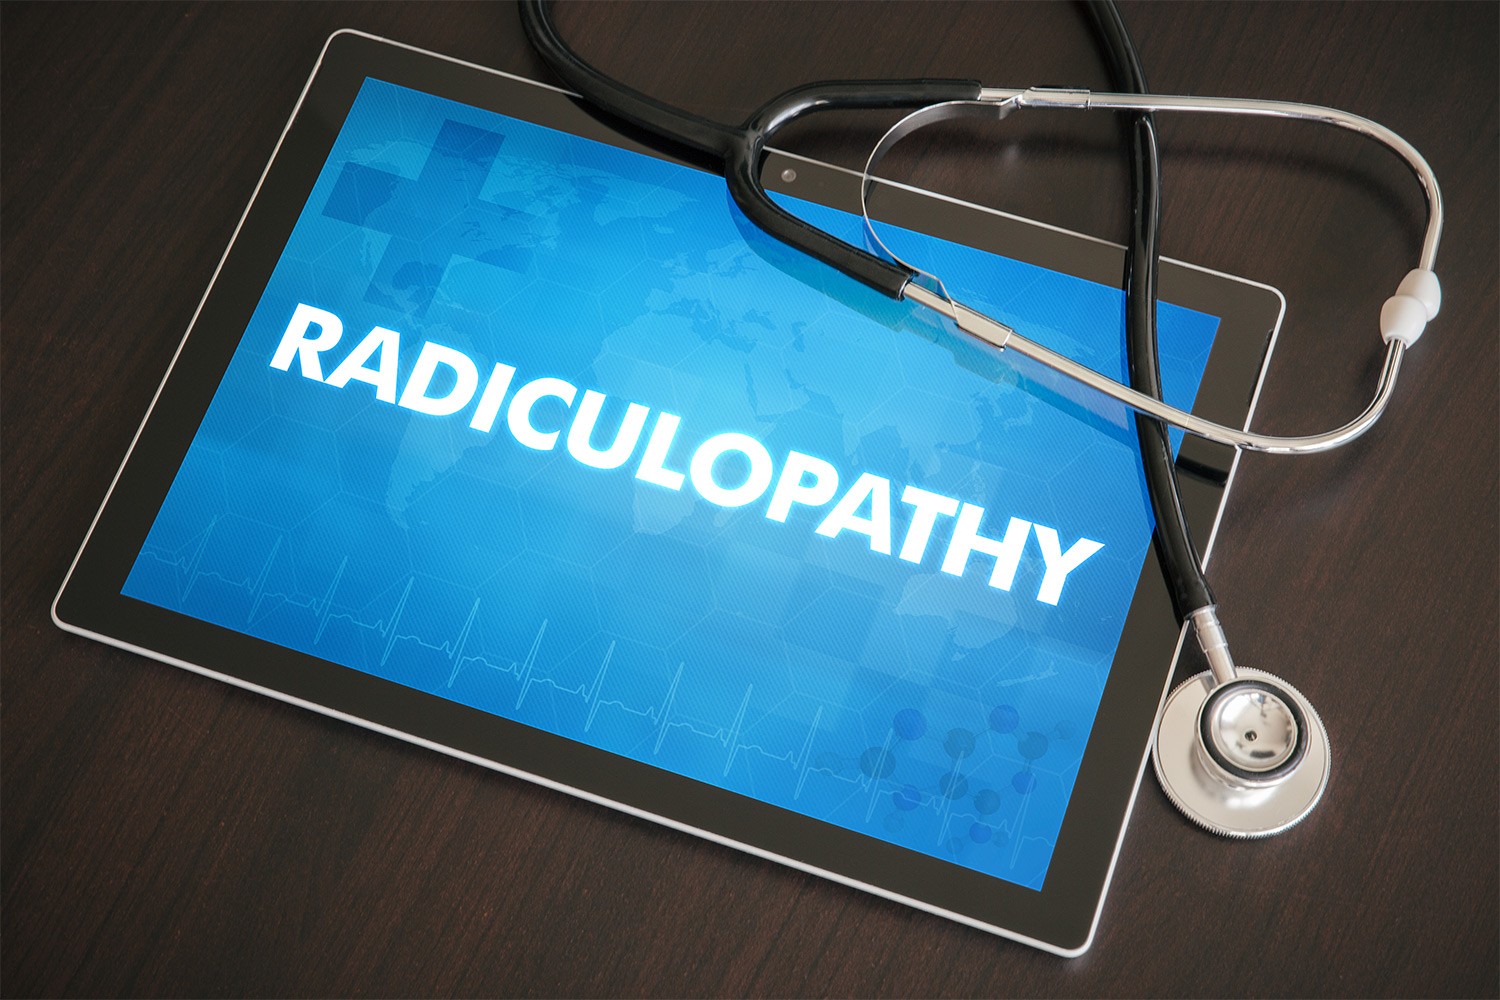 Radiculopathy VA Rating: What Does It Mean?